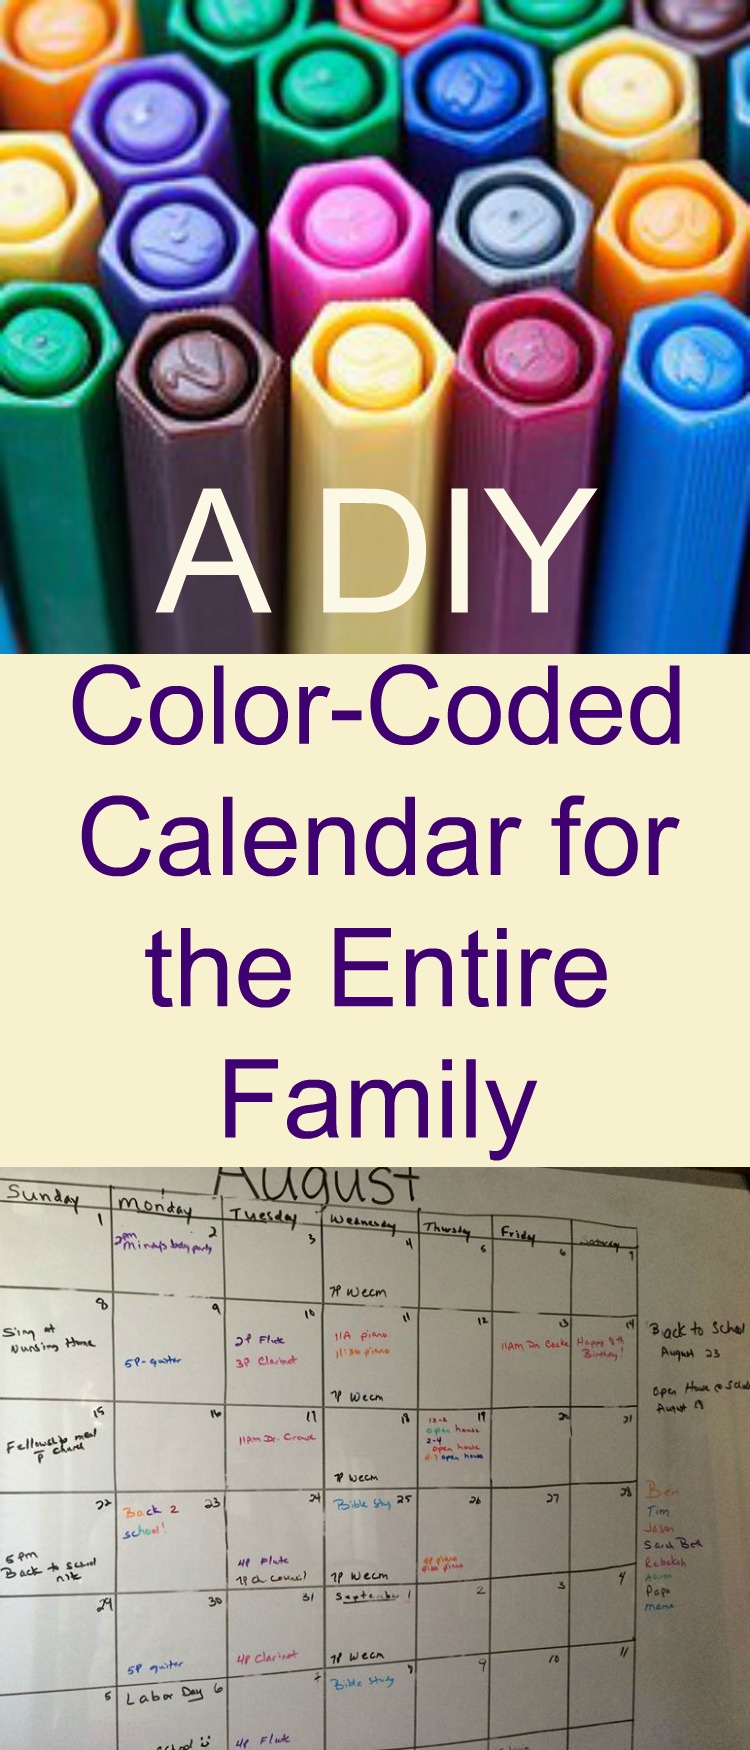 A DIY ColorCoded Calendar for the Entire Family